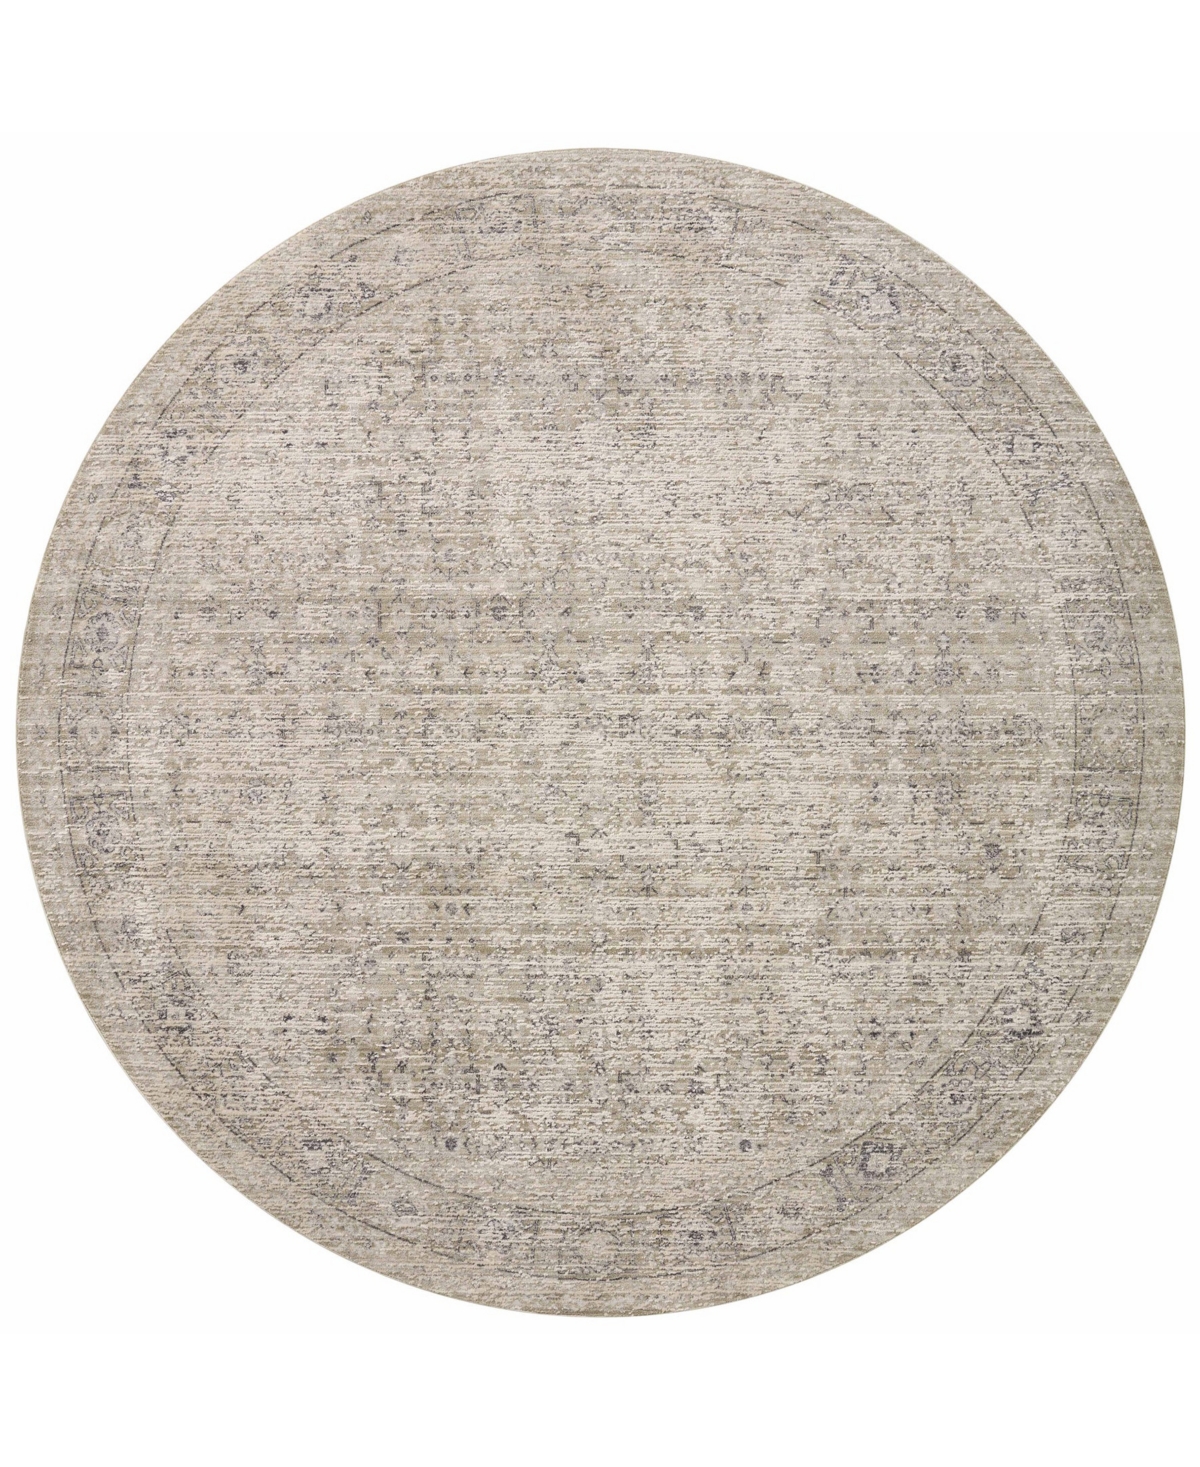 Amber Lewis X Loloi Alie Ale-03 7'10" X 7'10" Round Area Rug In Taupe,gray